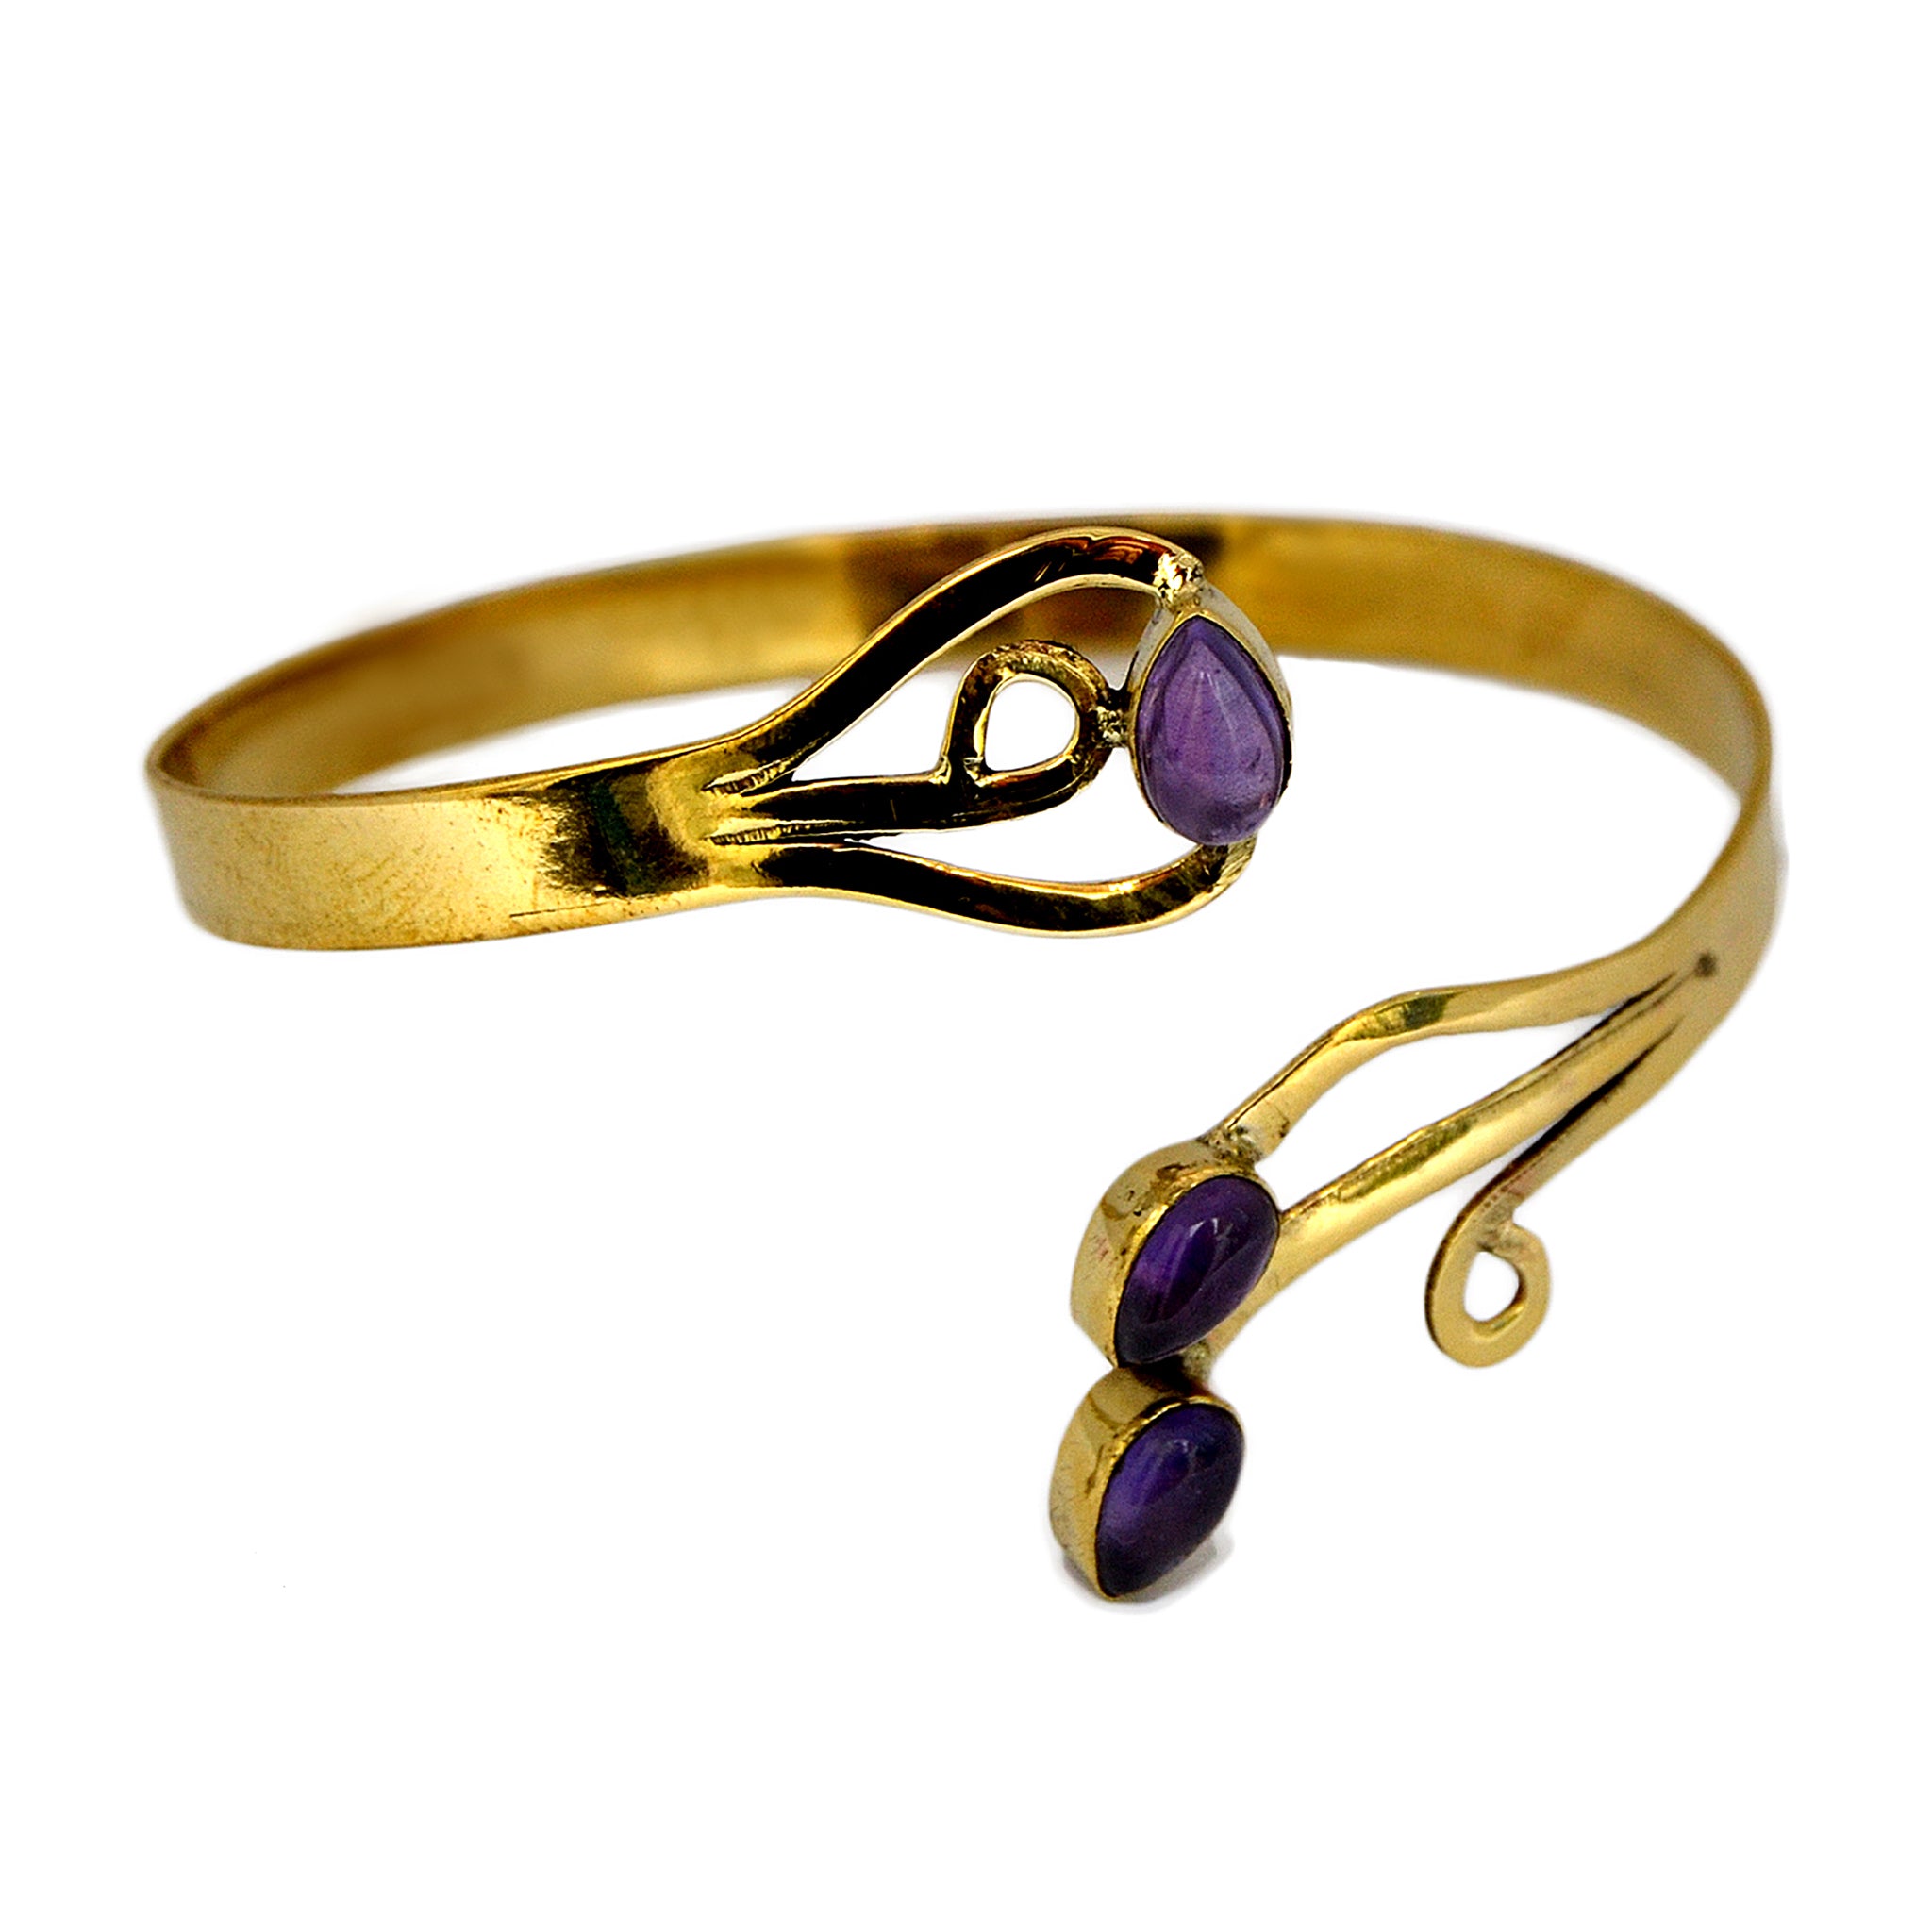 Indian bangle with amethyst